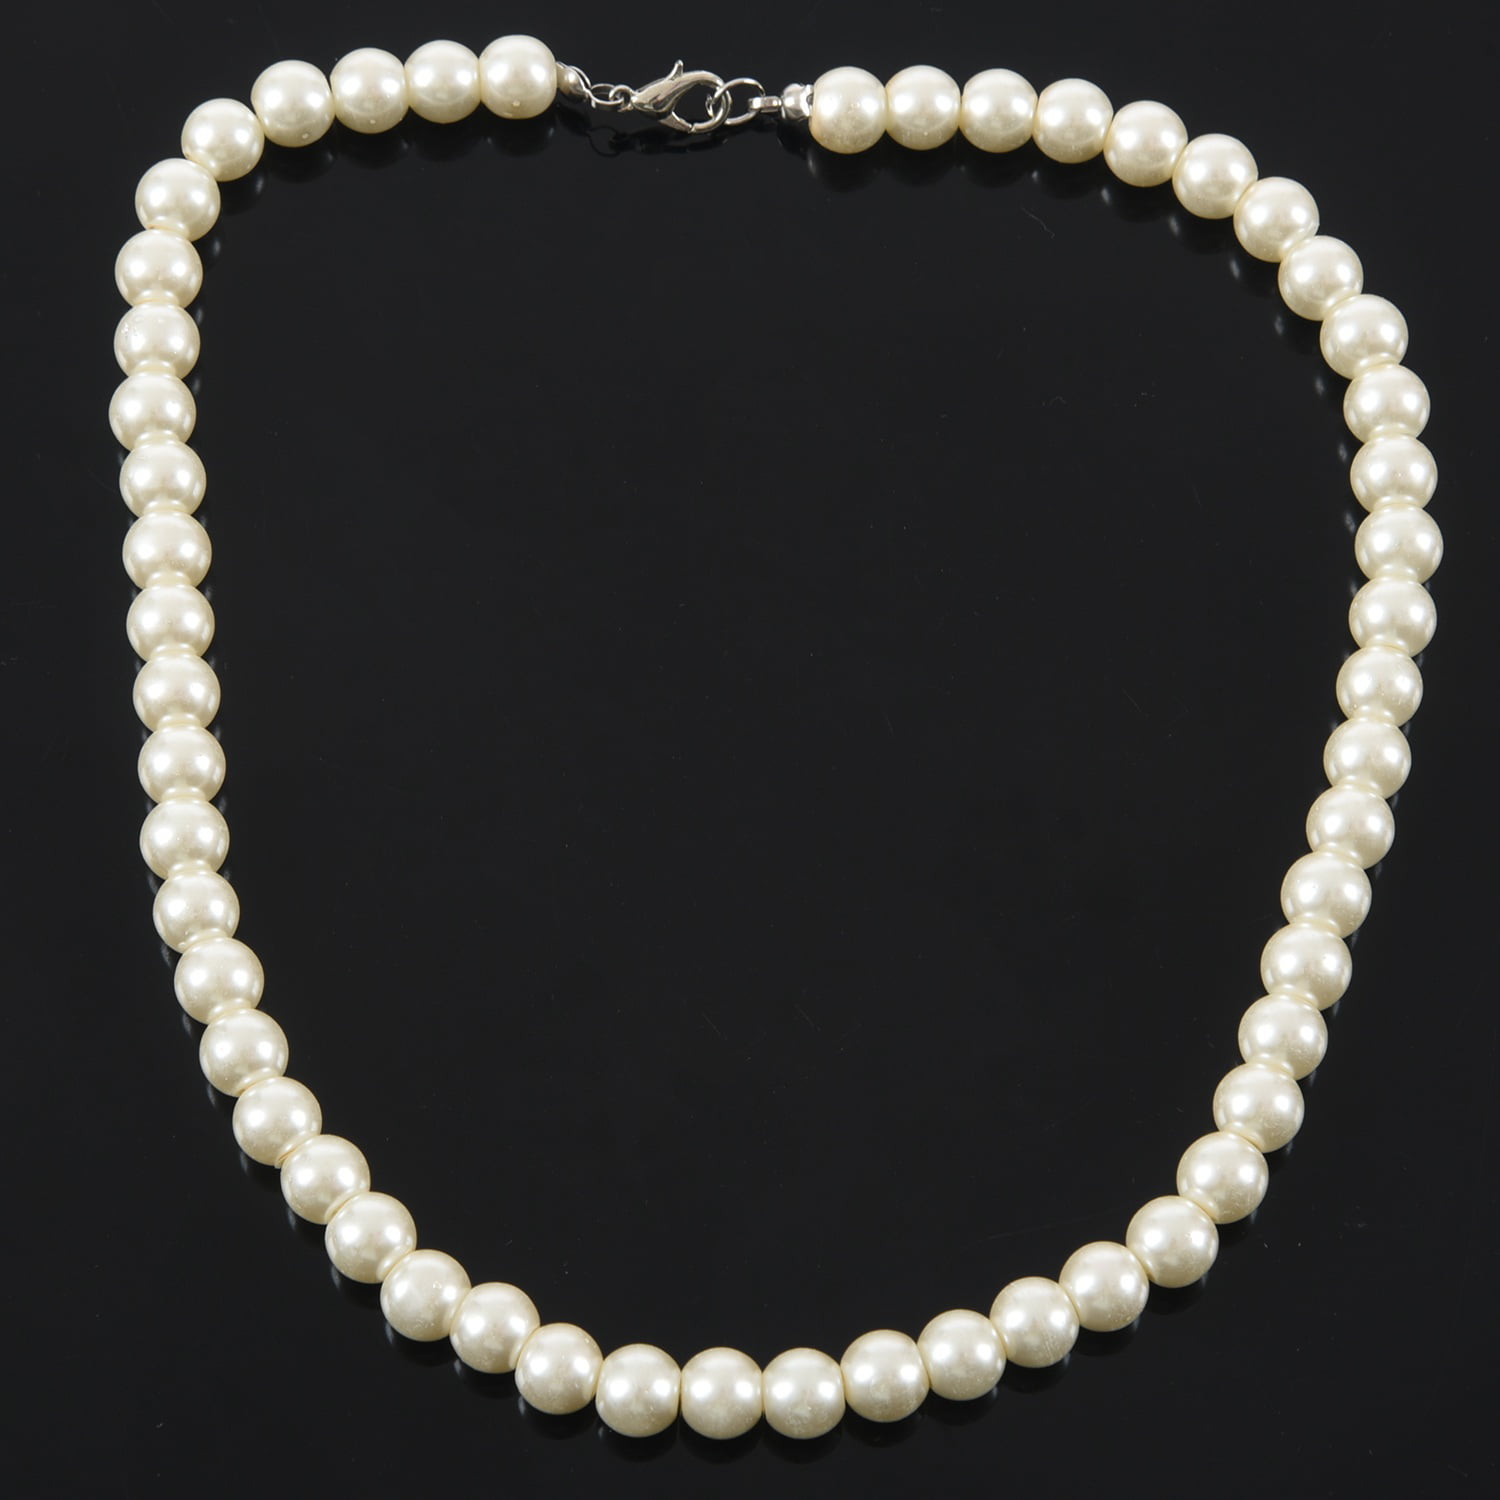 Plastic Screw Clasp White Single Strand Faux Pearl Necklace N3